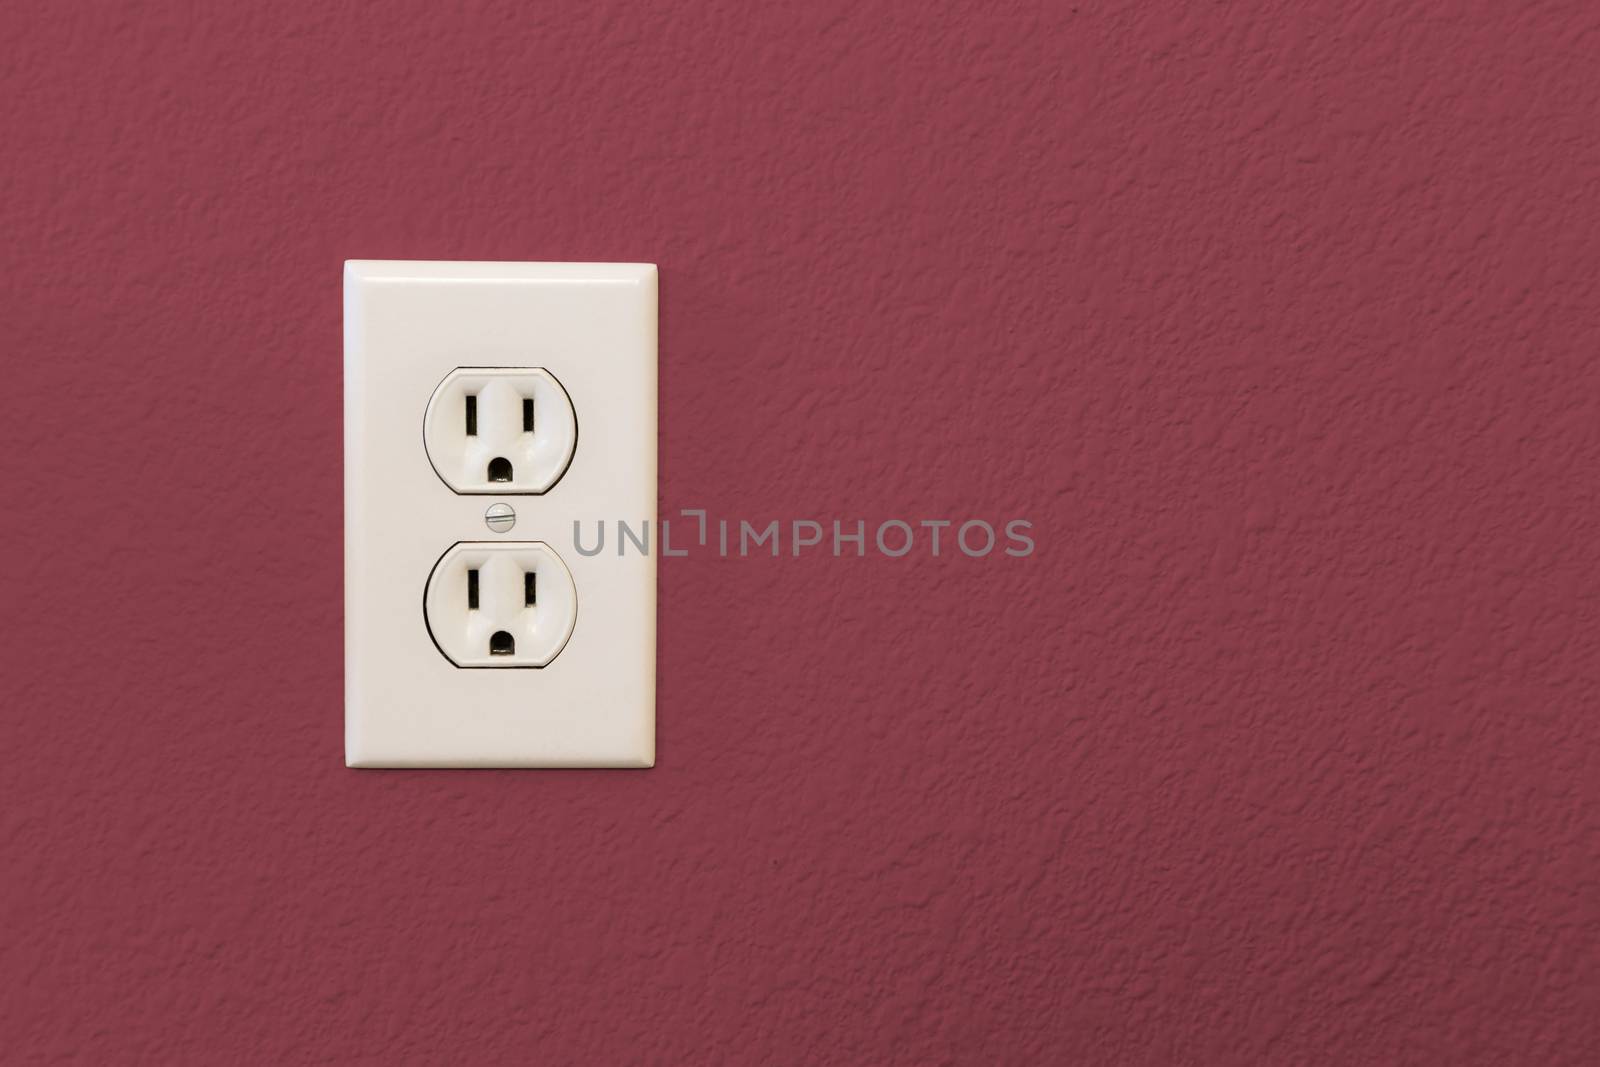 Electrical Sockets In Colorful Burgundy Wall of House. by Feverpitched